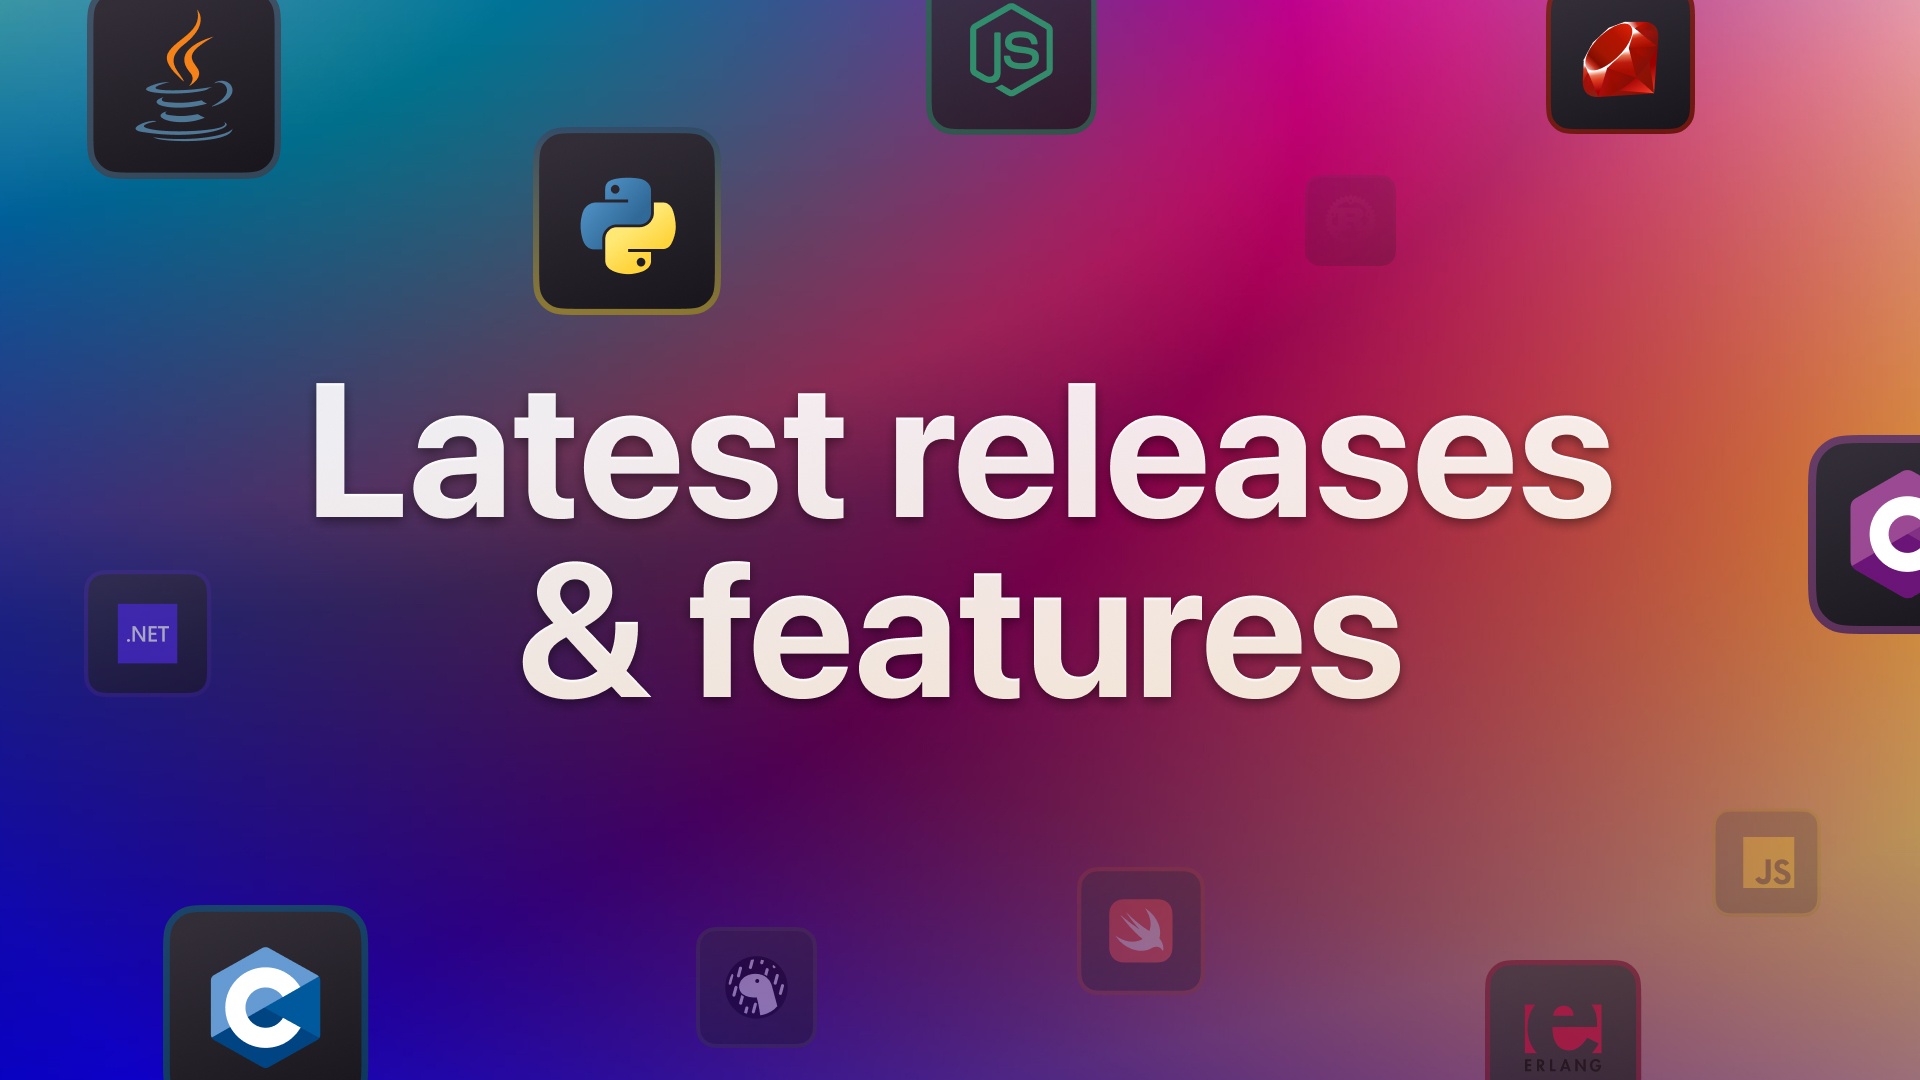 Latest releases & features